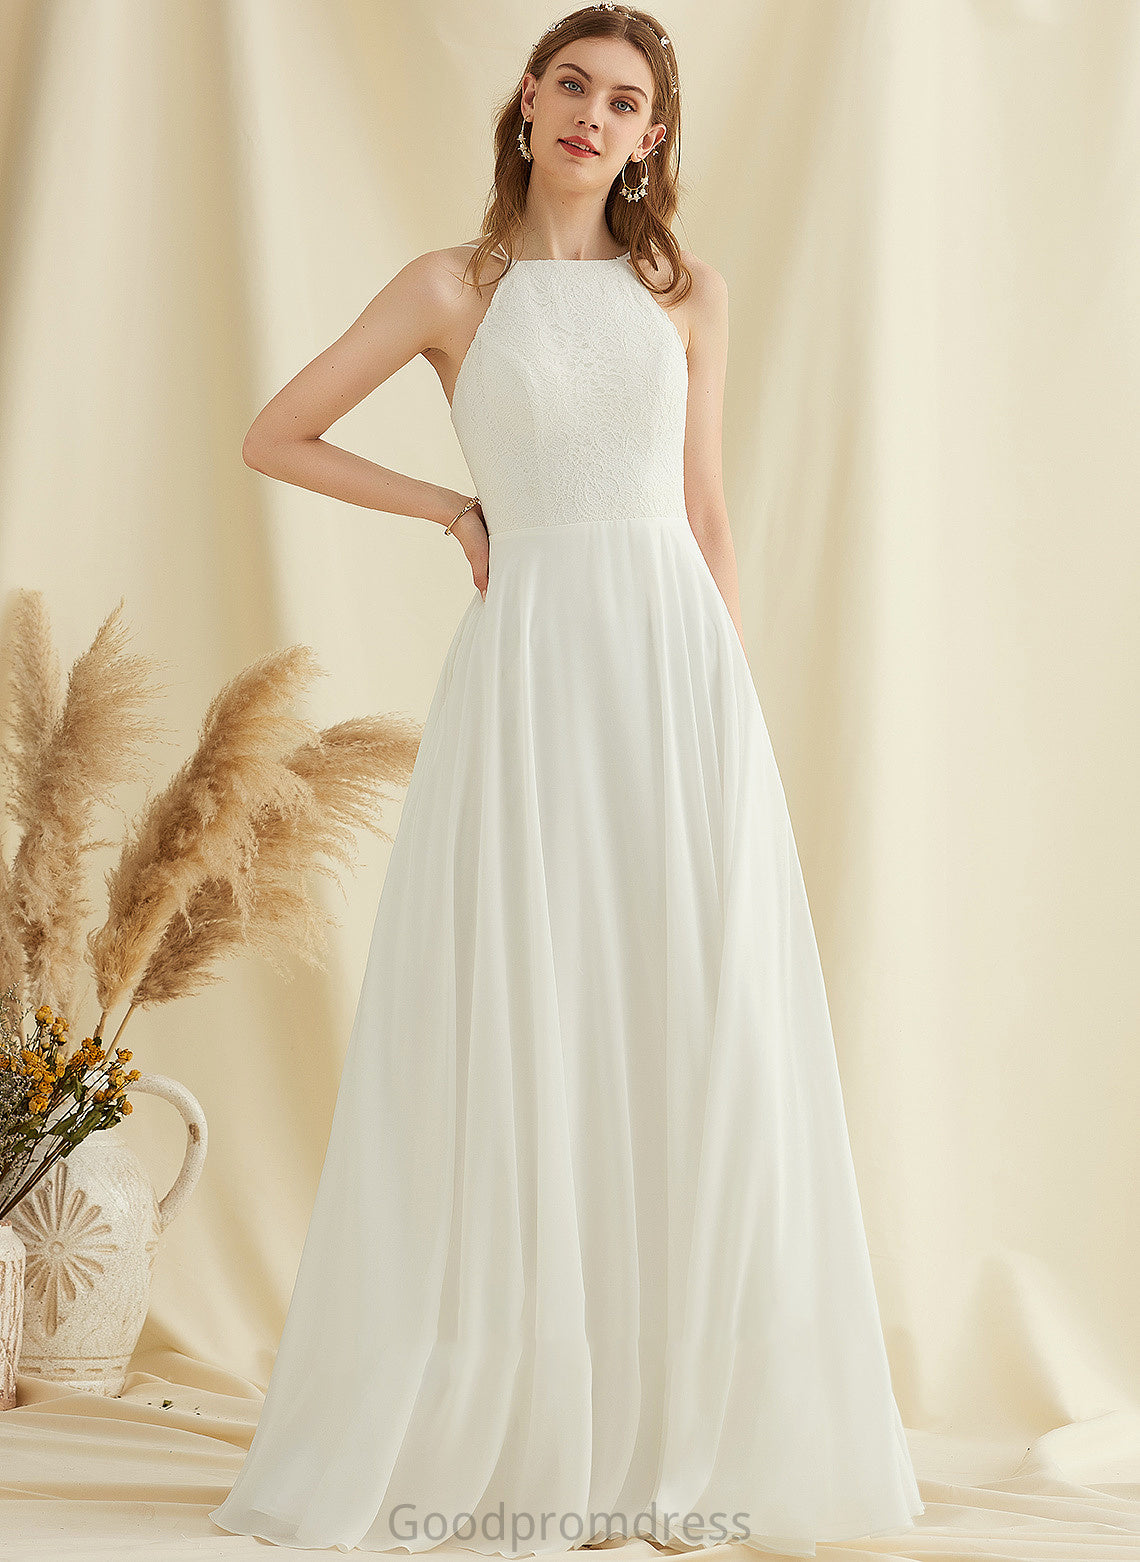 Lace Pockets Rylie Scoop Wedding A-Line Wedding Dresses Neck Dress Chiffon With Floor-Length